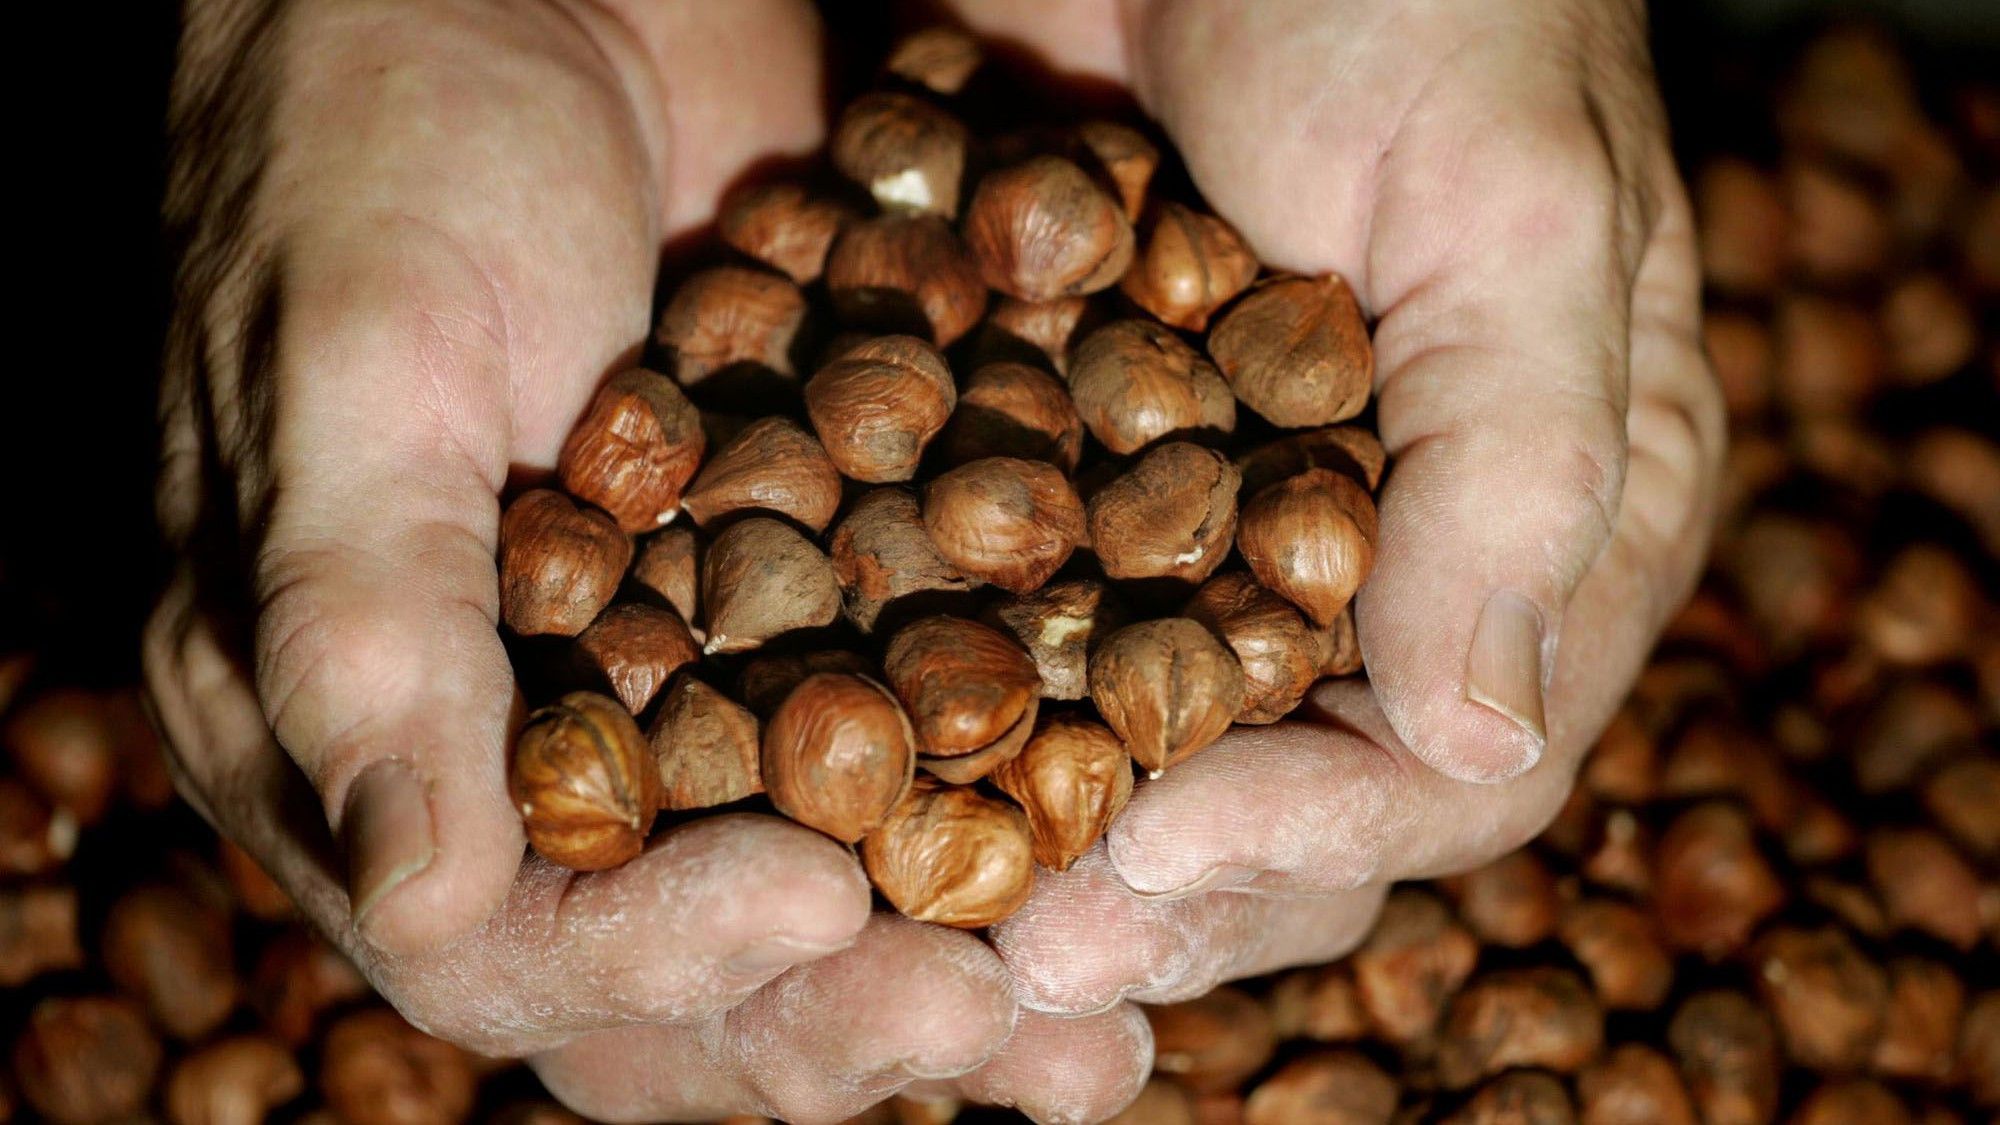 This small Turkish town grows a quarter of the world's hazelnuts ...